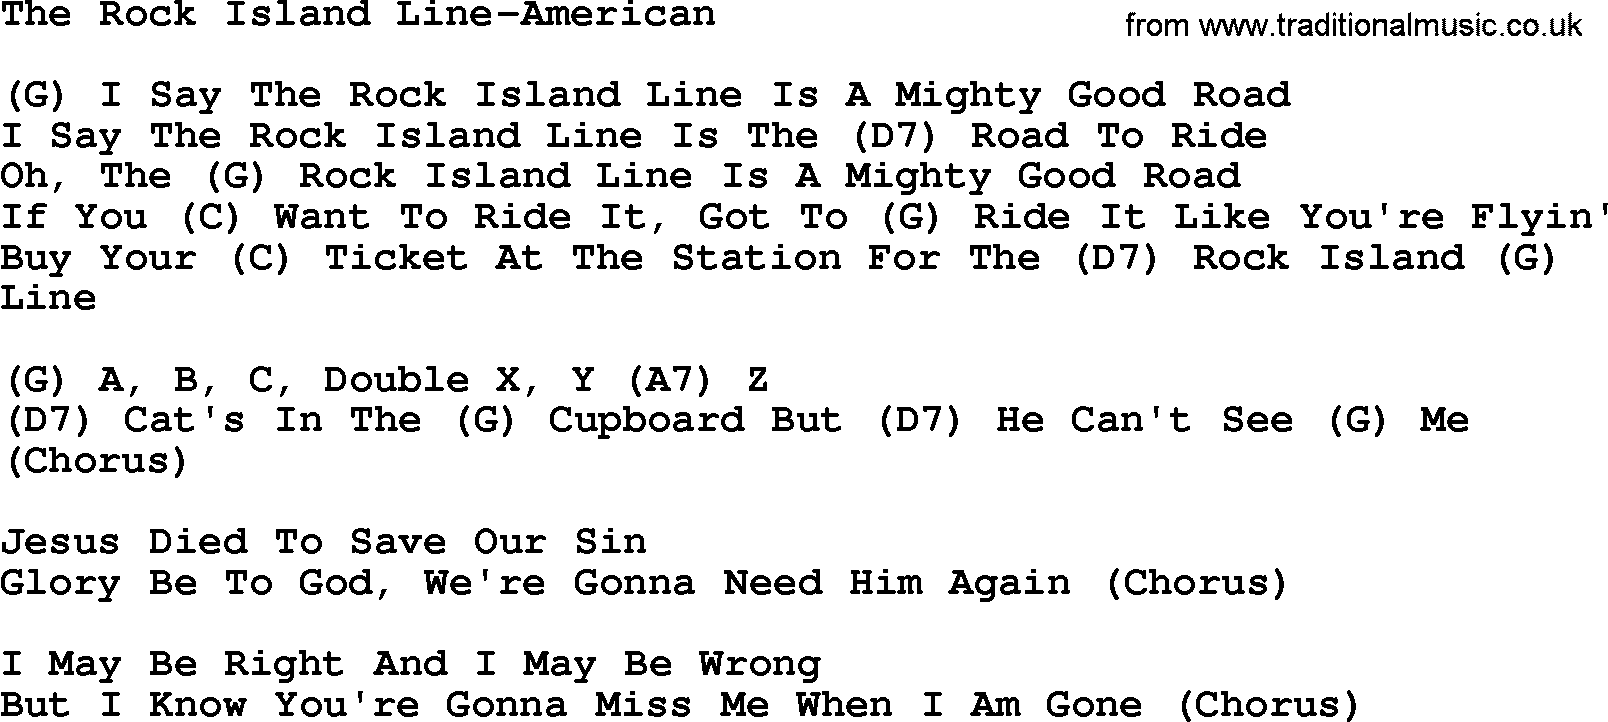 Country music song: The Rock Island Line-American lyrics and chords